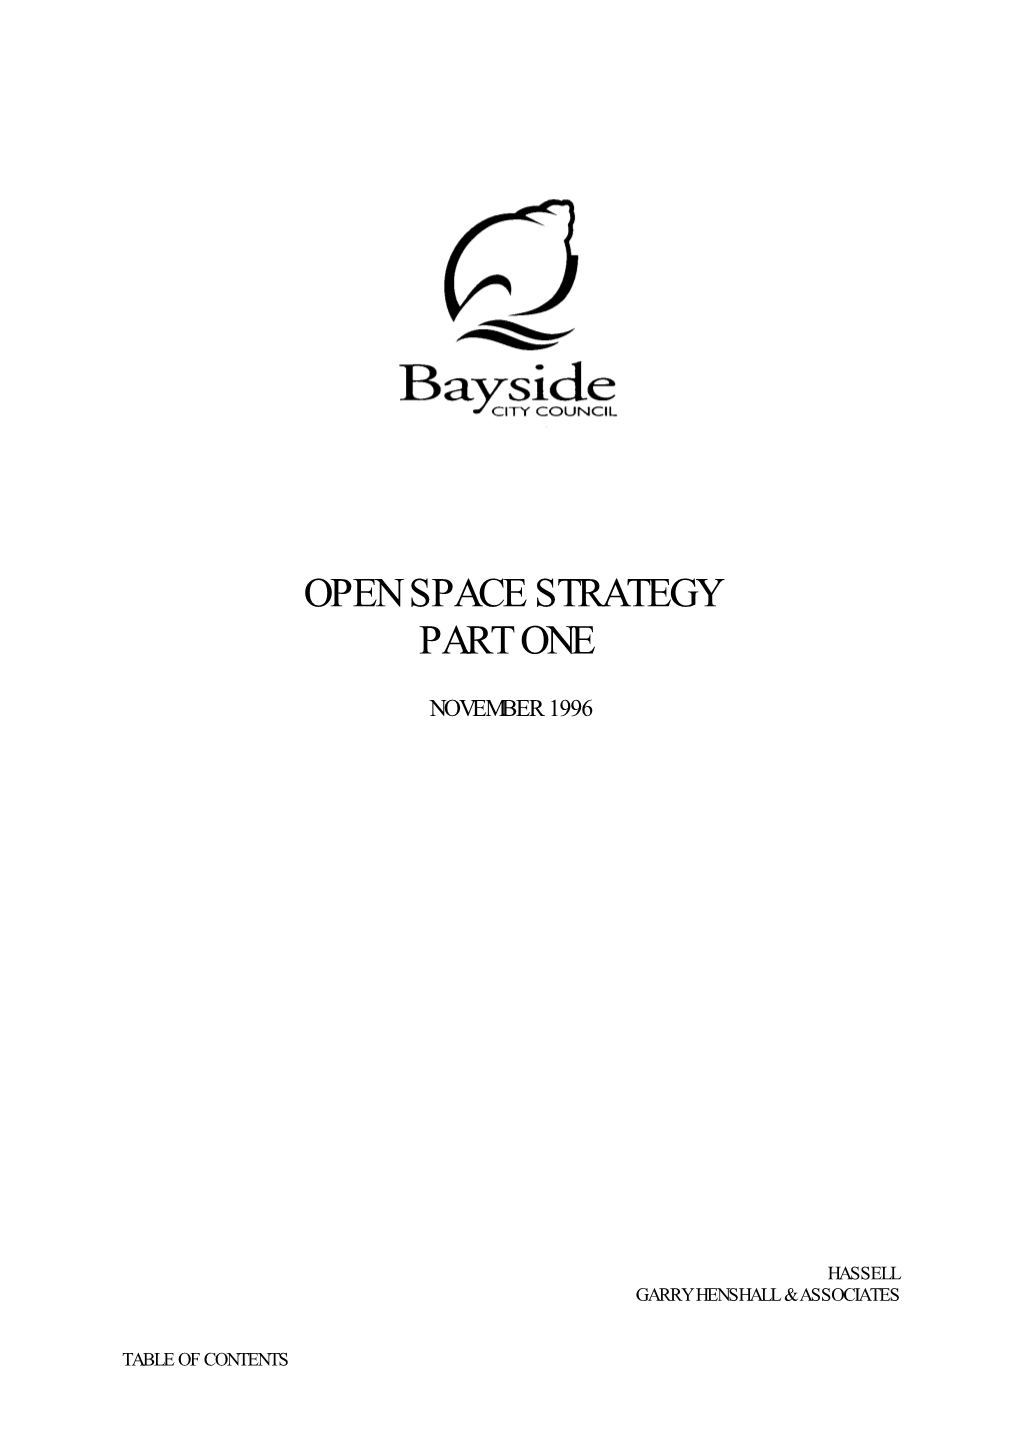 Bayside City Council Open Space Strategy